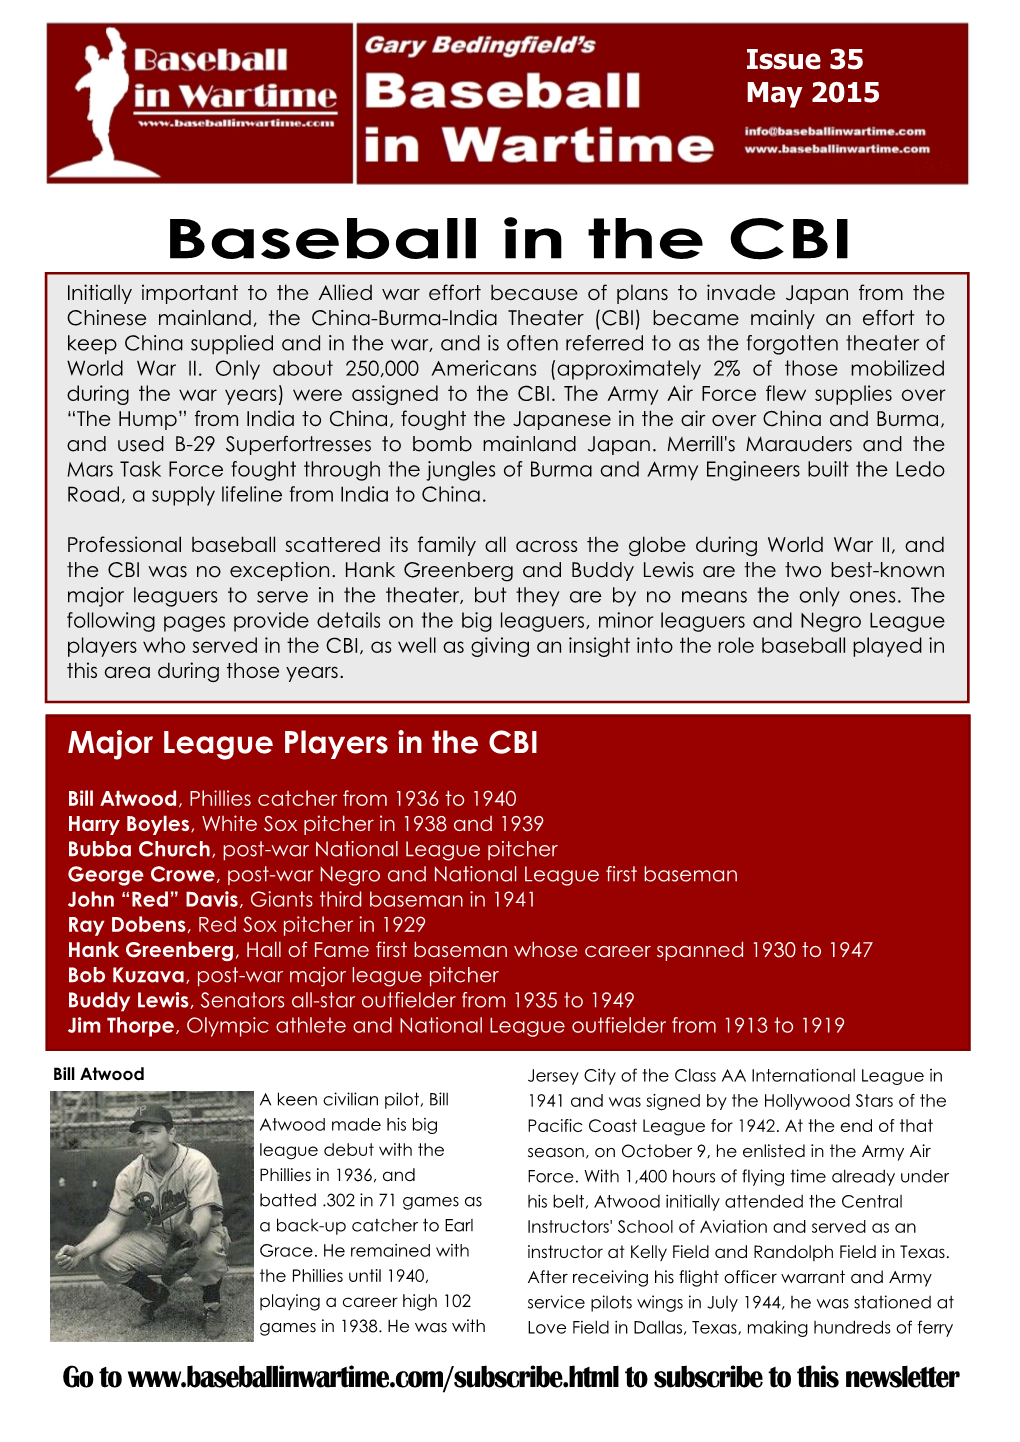 Baseball in Wartime Newsletter Vol 7 No 35 May 2015